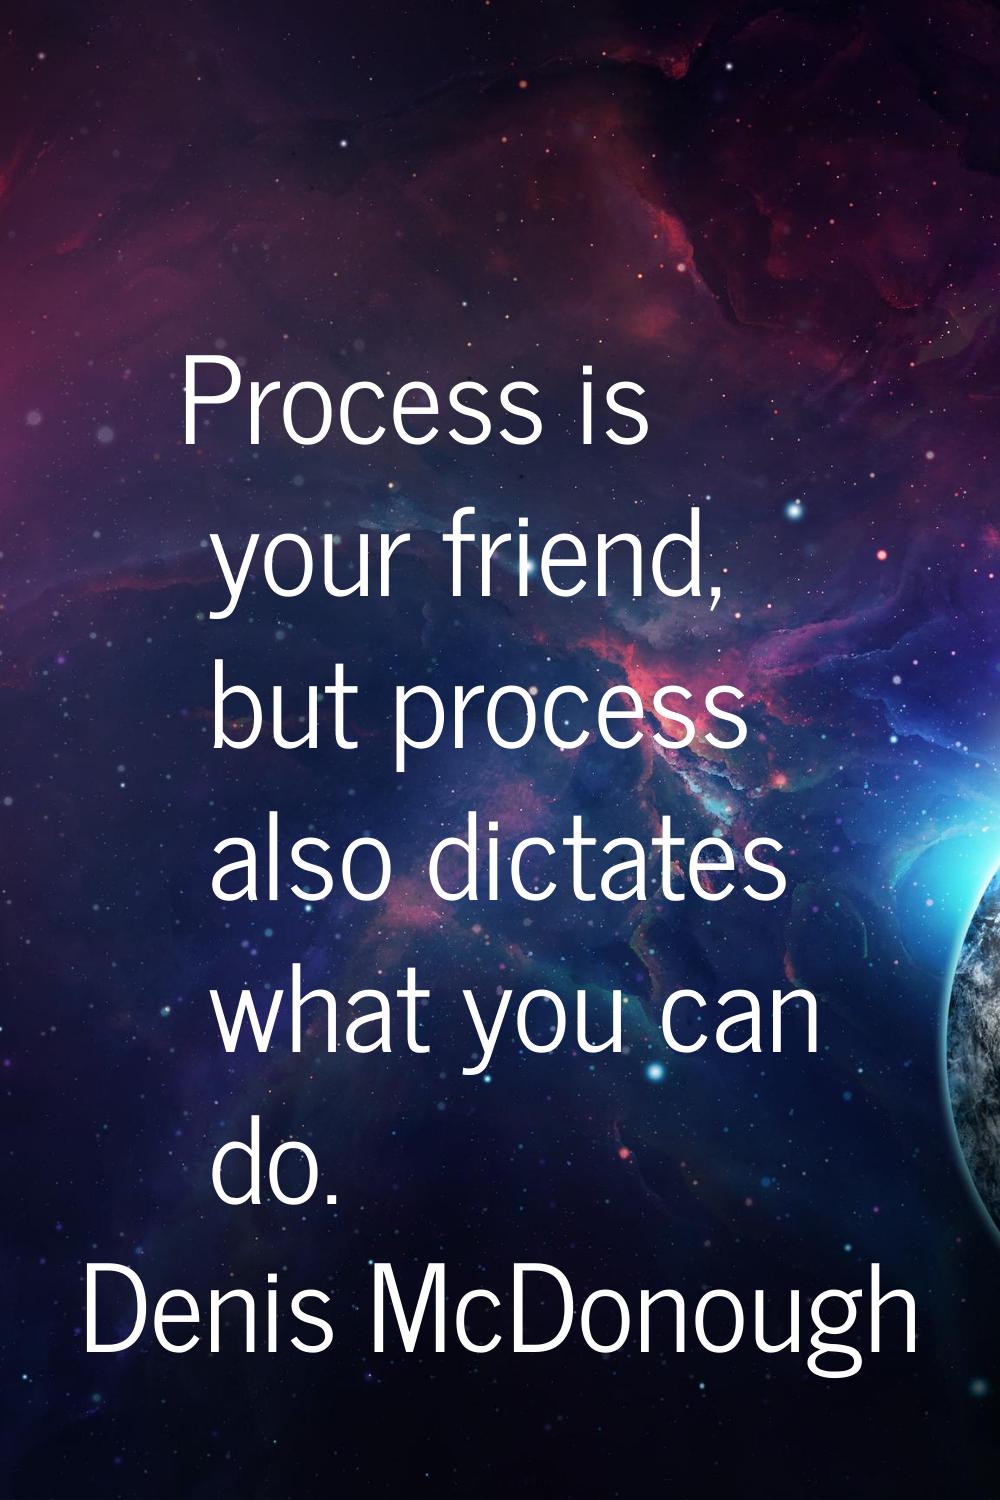 Process is your friend, but process also dictates what you can do.